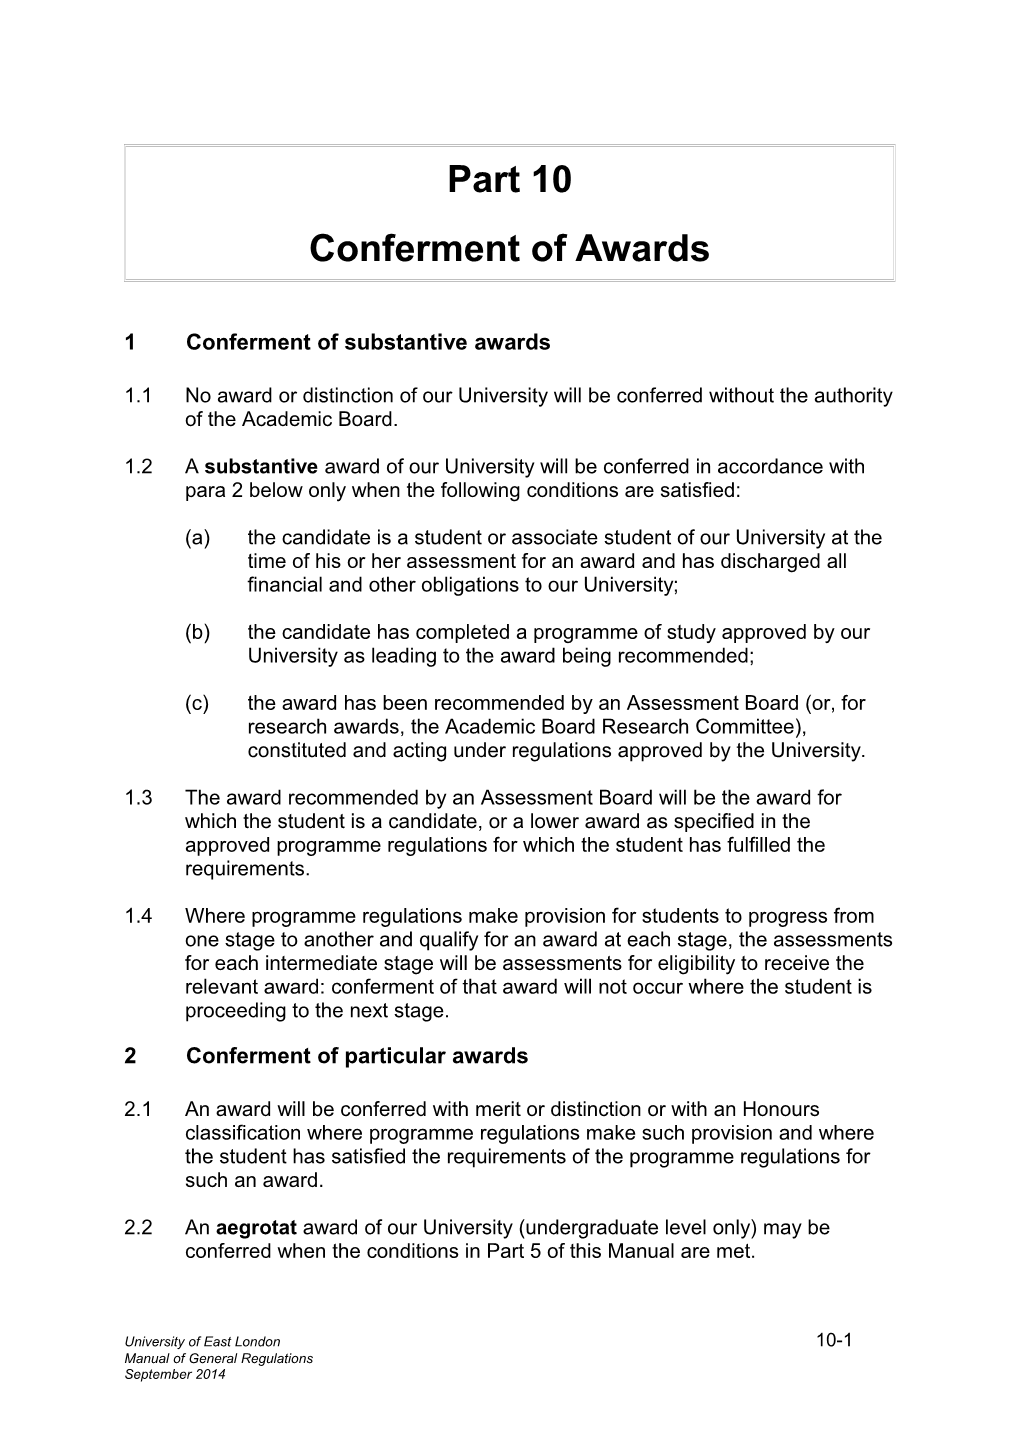 7	Conferment of the University's Awards and Distinctions